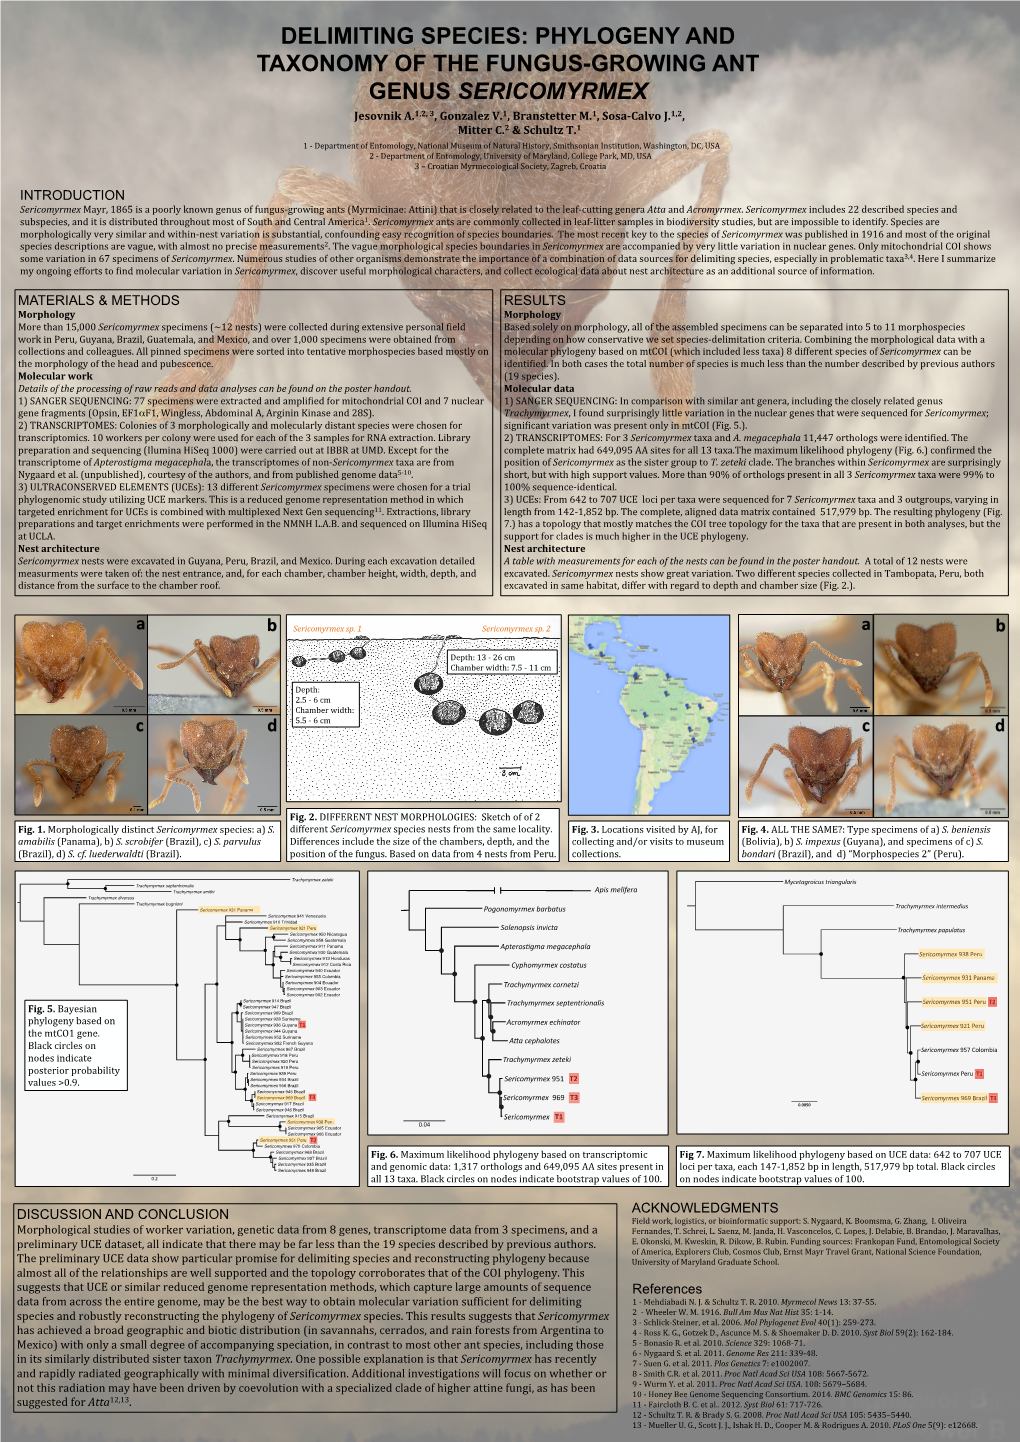 Phylogeny and Taxonomy of the Fungus-Growing Ant